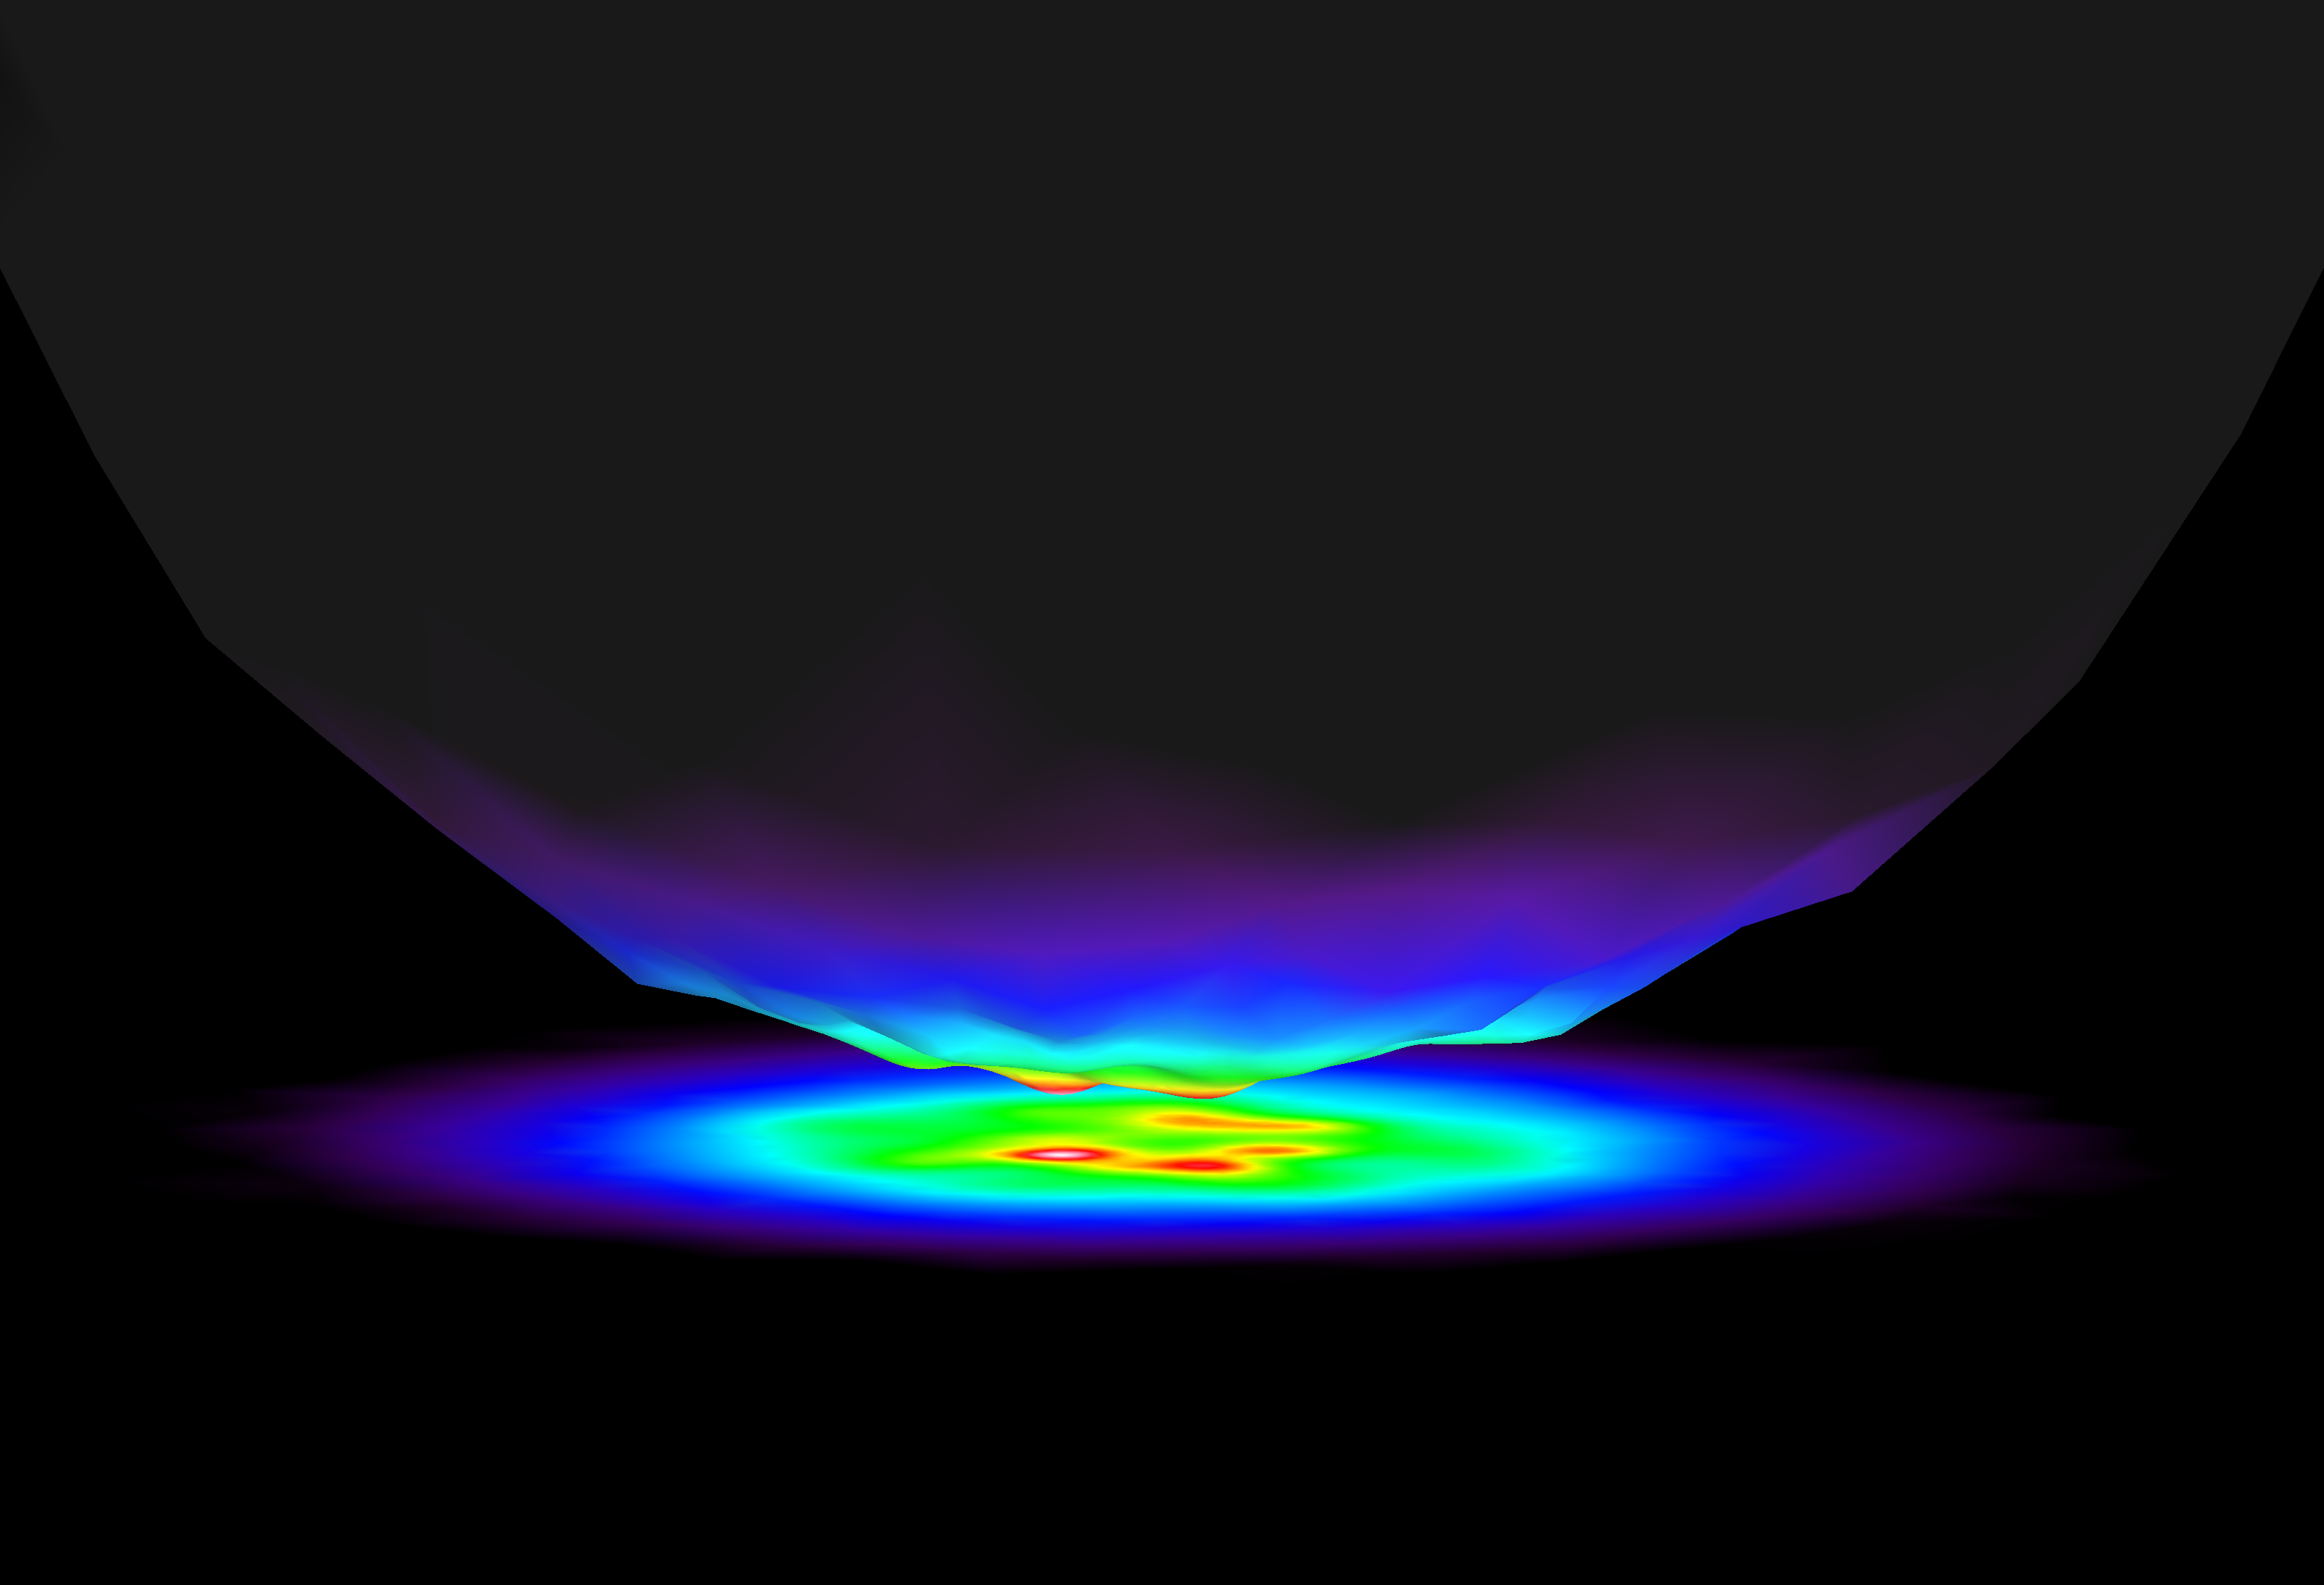 Extreme near-field radiative thermal radiation between a silica tip and a silica surface.